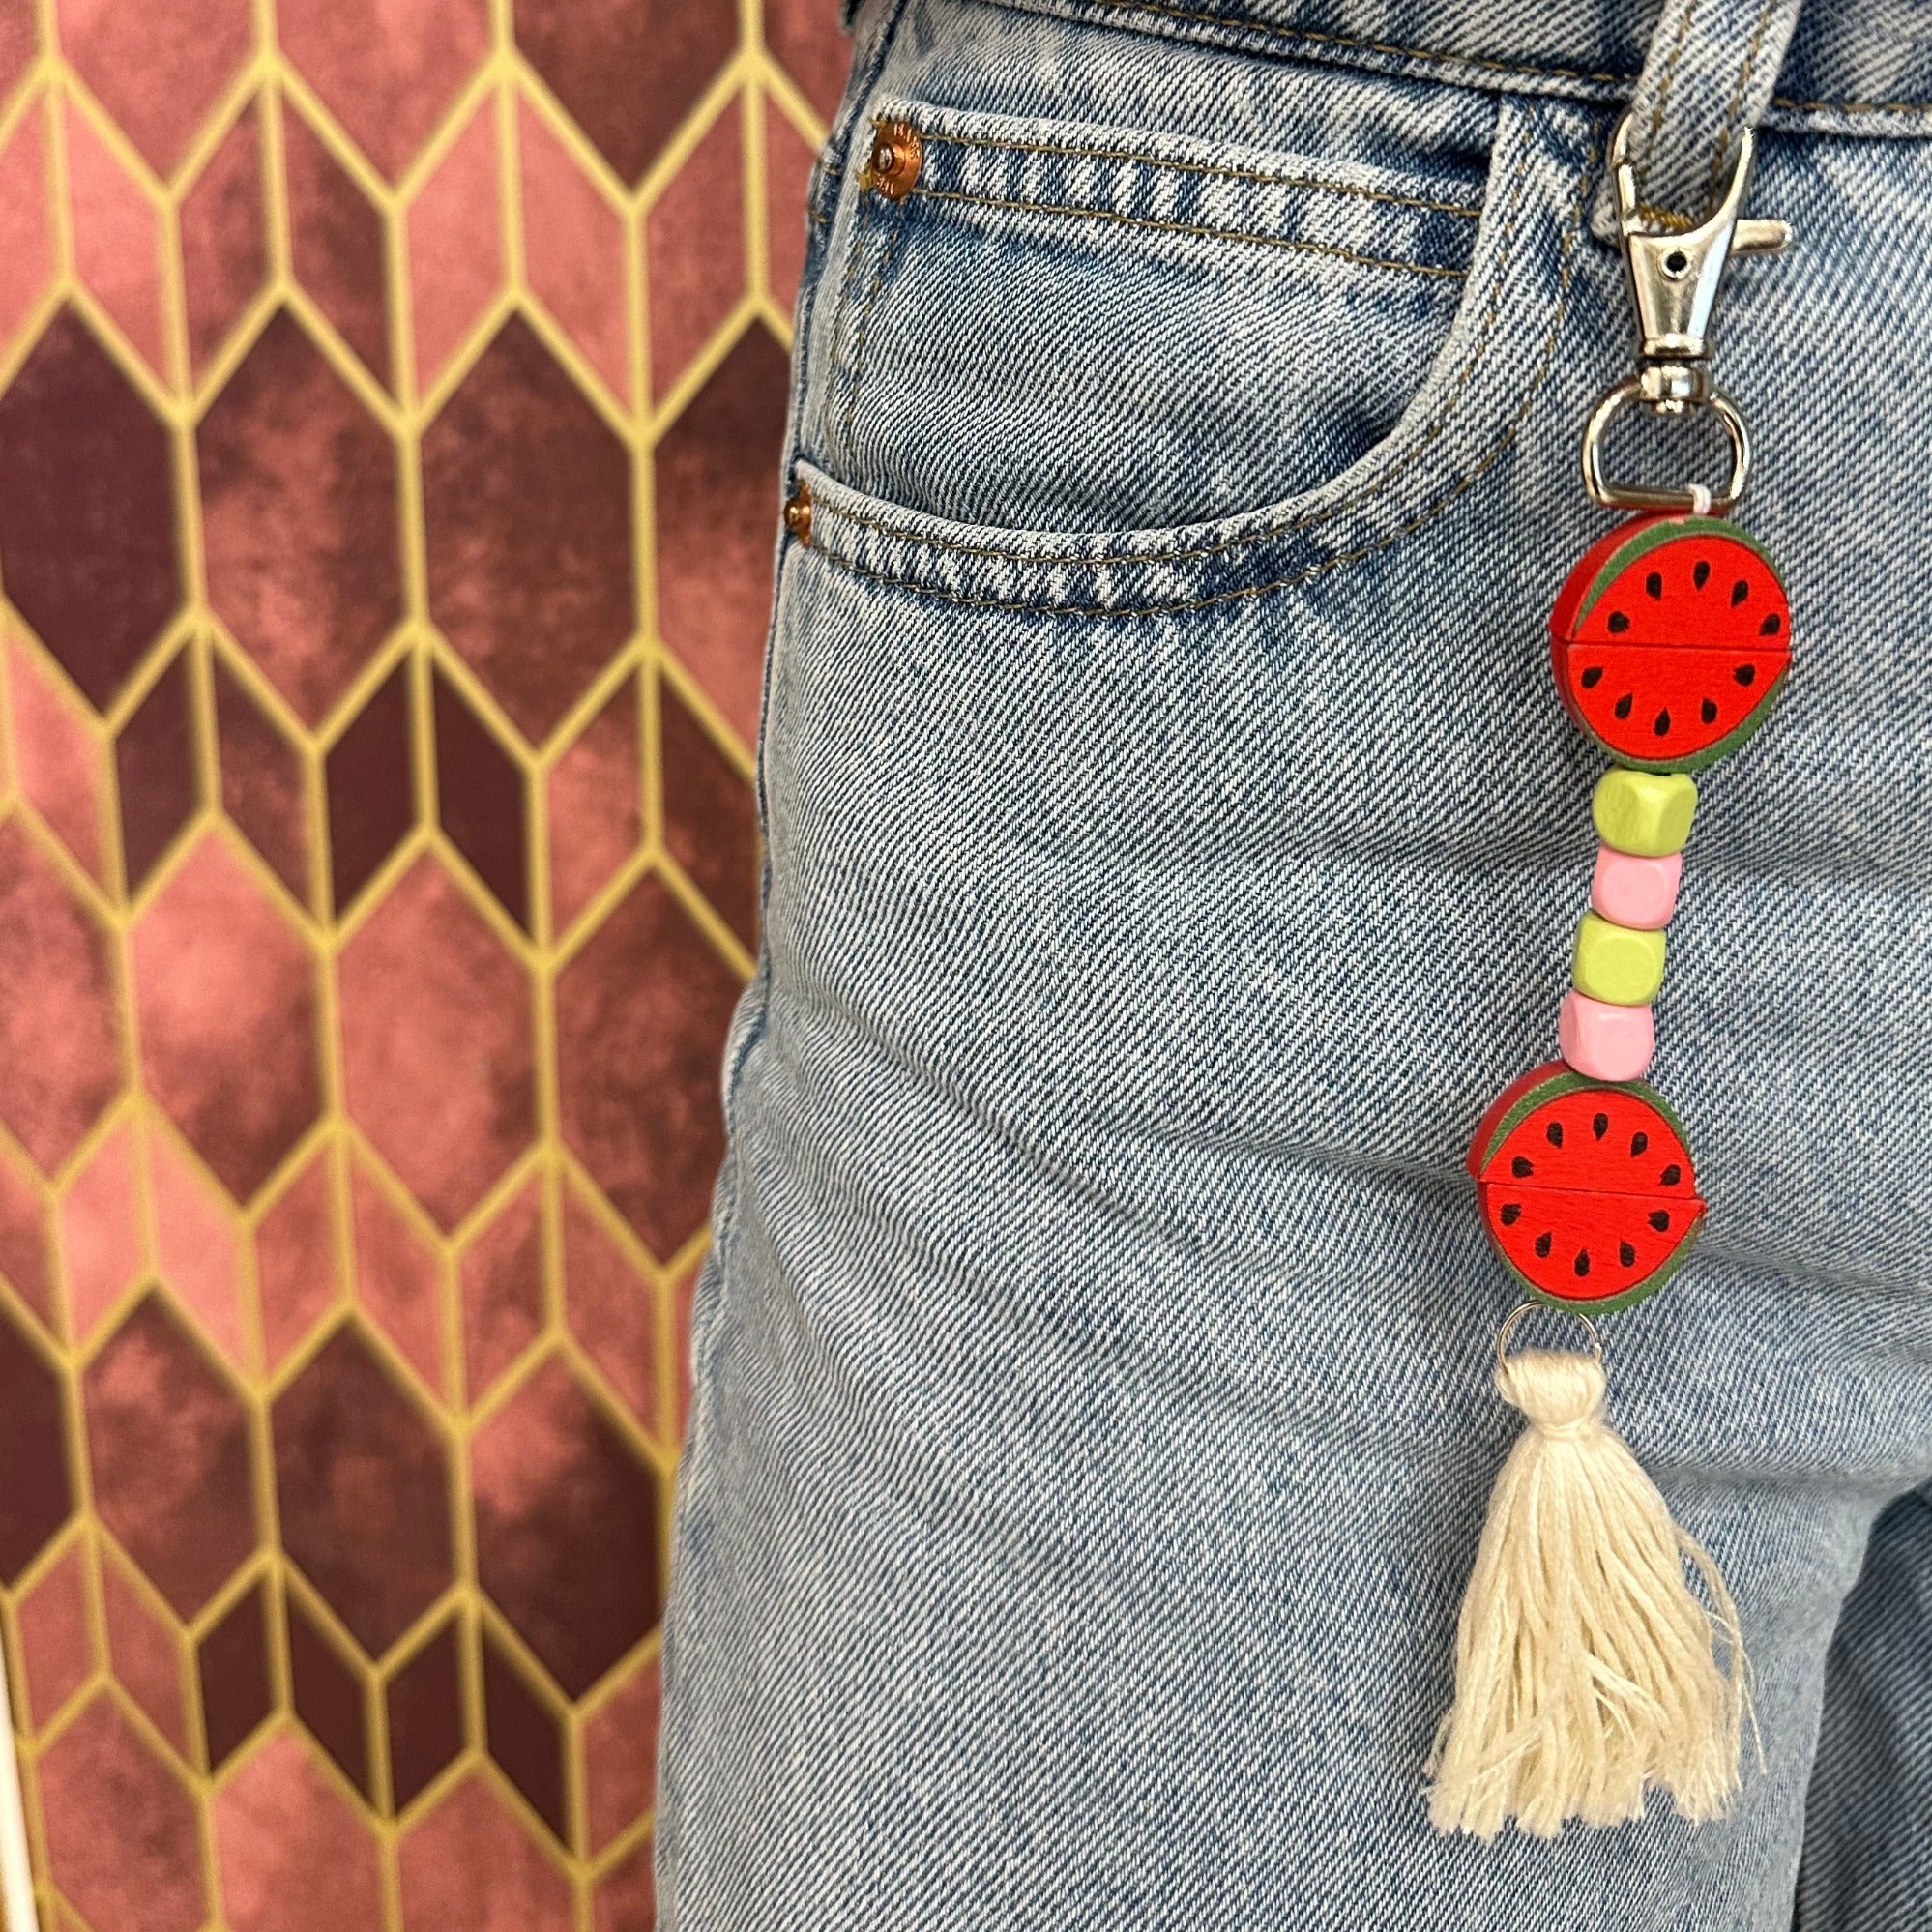 Create Your Own : Watermelon Accessories